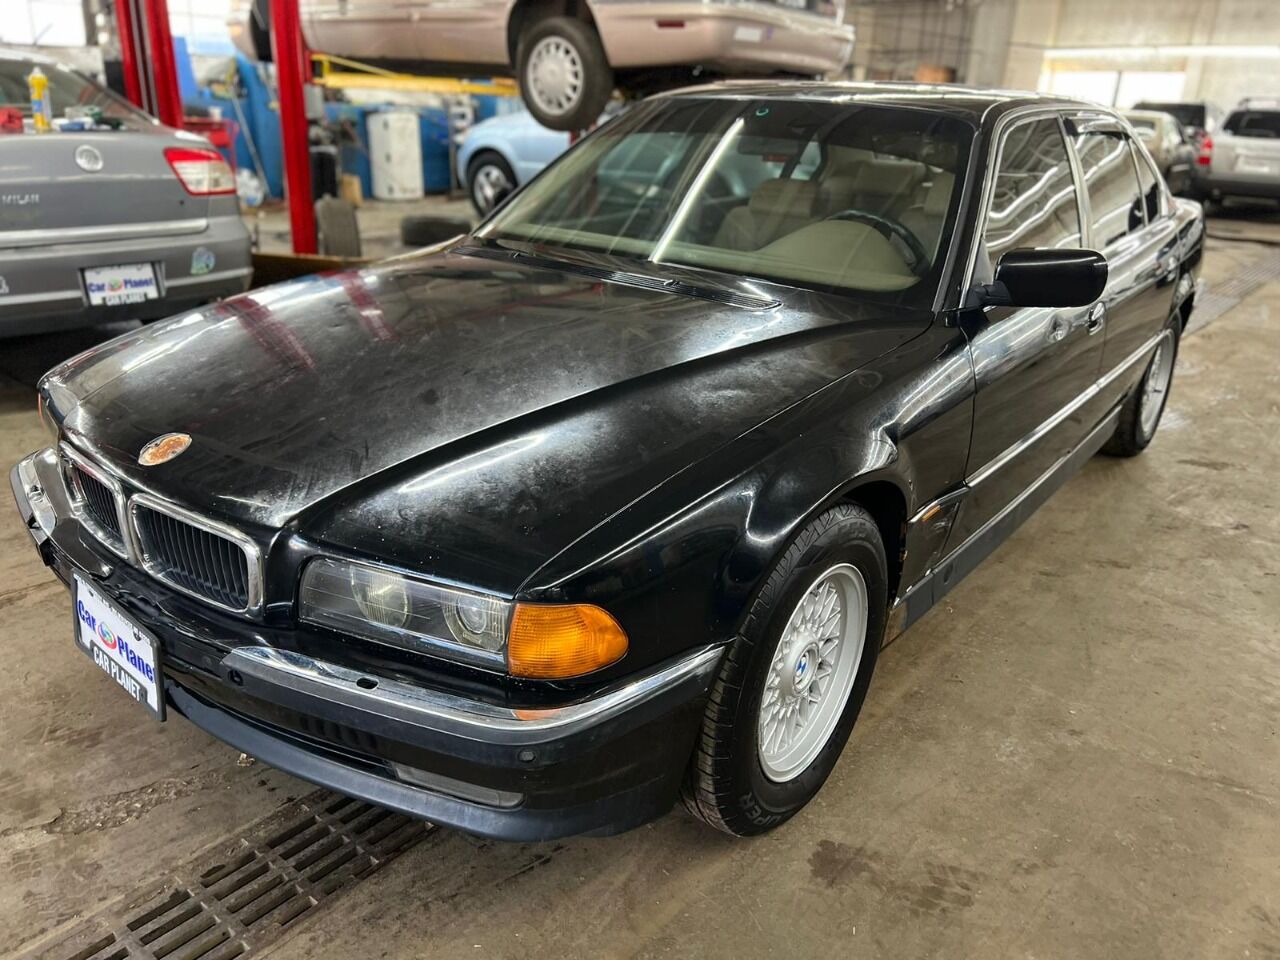 1997 BMW 7 Series For Sale - Carsforsale.com®